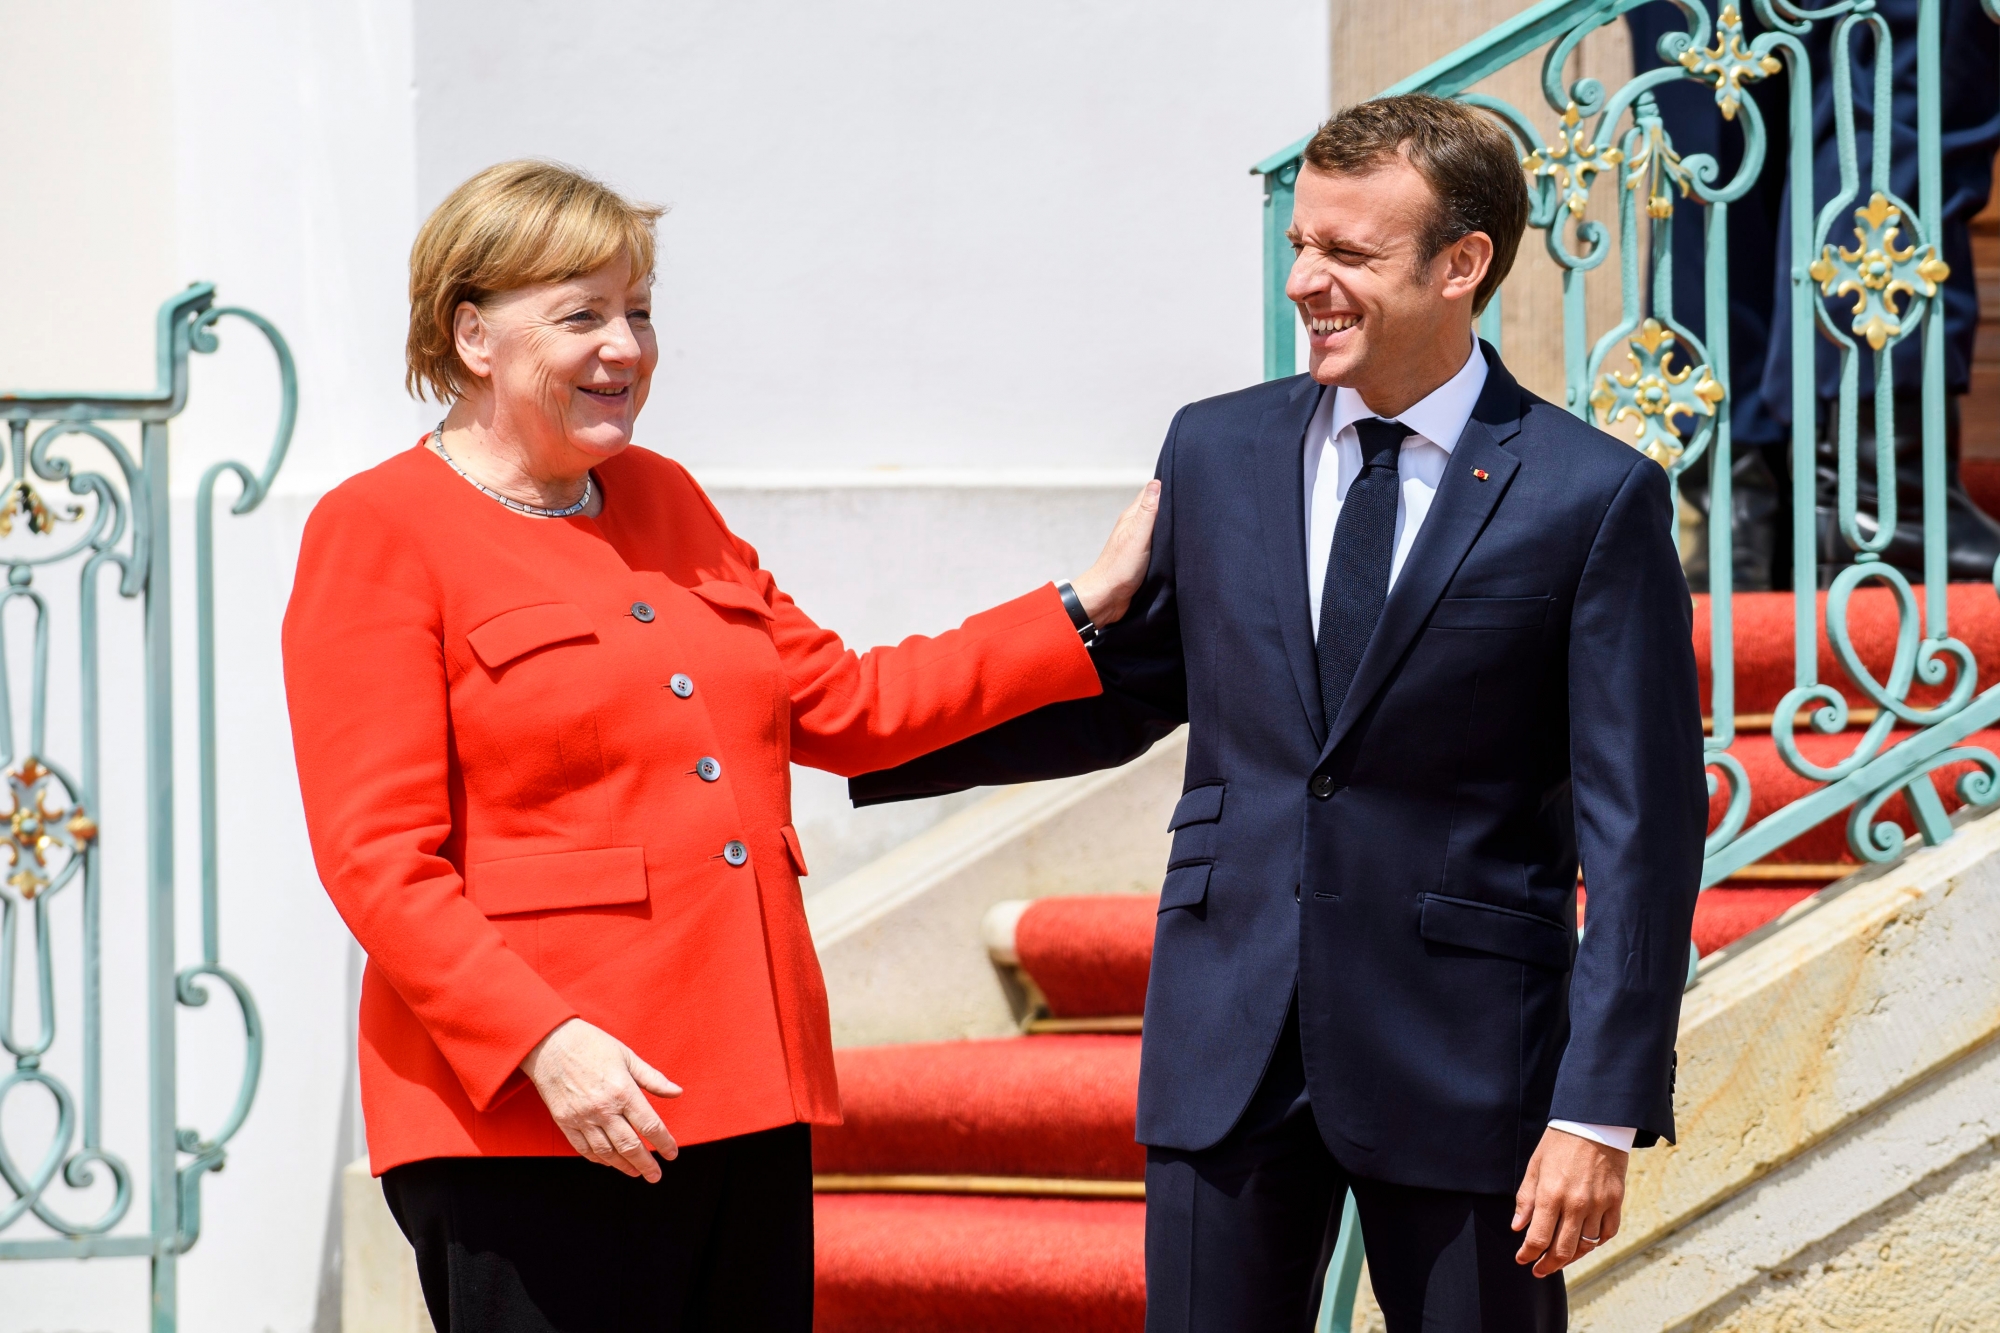 epa06820631 German Chancellor Angela Merkel (L) welcomes French President Emmanuel Macron (R) during the German-French Ministers Meeting in front of the German government's guest house Meseberg Palace, in Meseberg, near Berlin, Germany, 19 June 2018. German and French ministers meet for a one day meeting to discuss bilateral topics, including Foreign, Defence and Security politics.  EPA/CHRISTIAN BRUNA GERMANY FRANCE DIPLOMACY